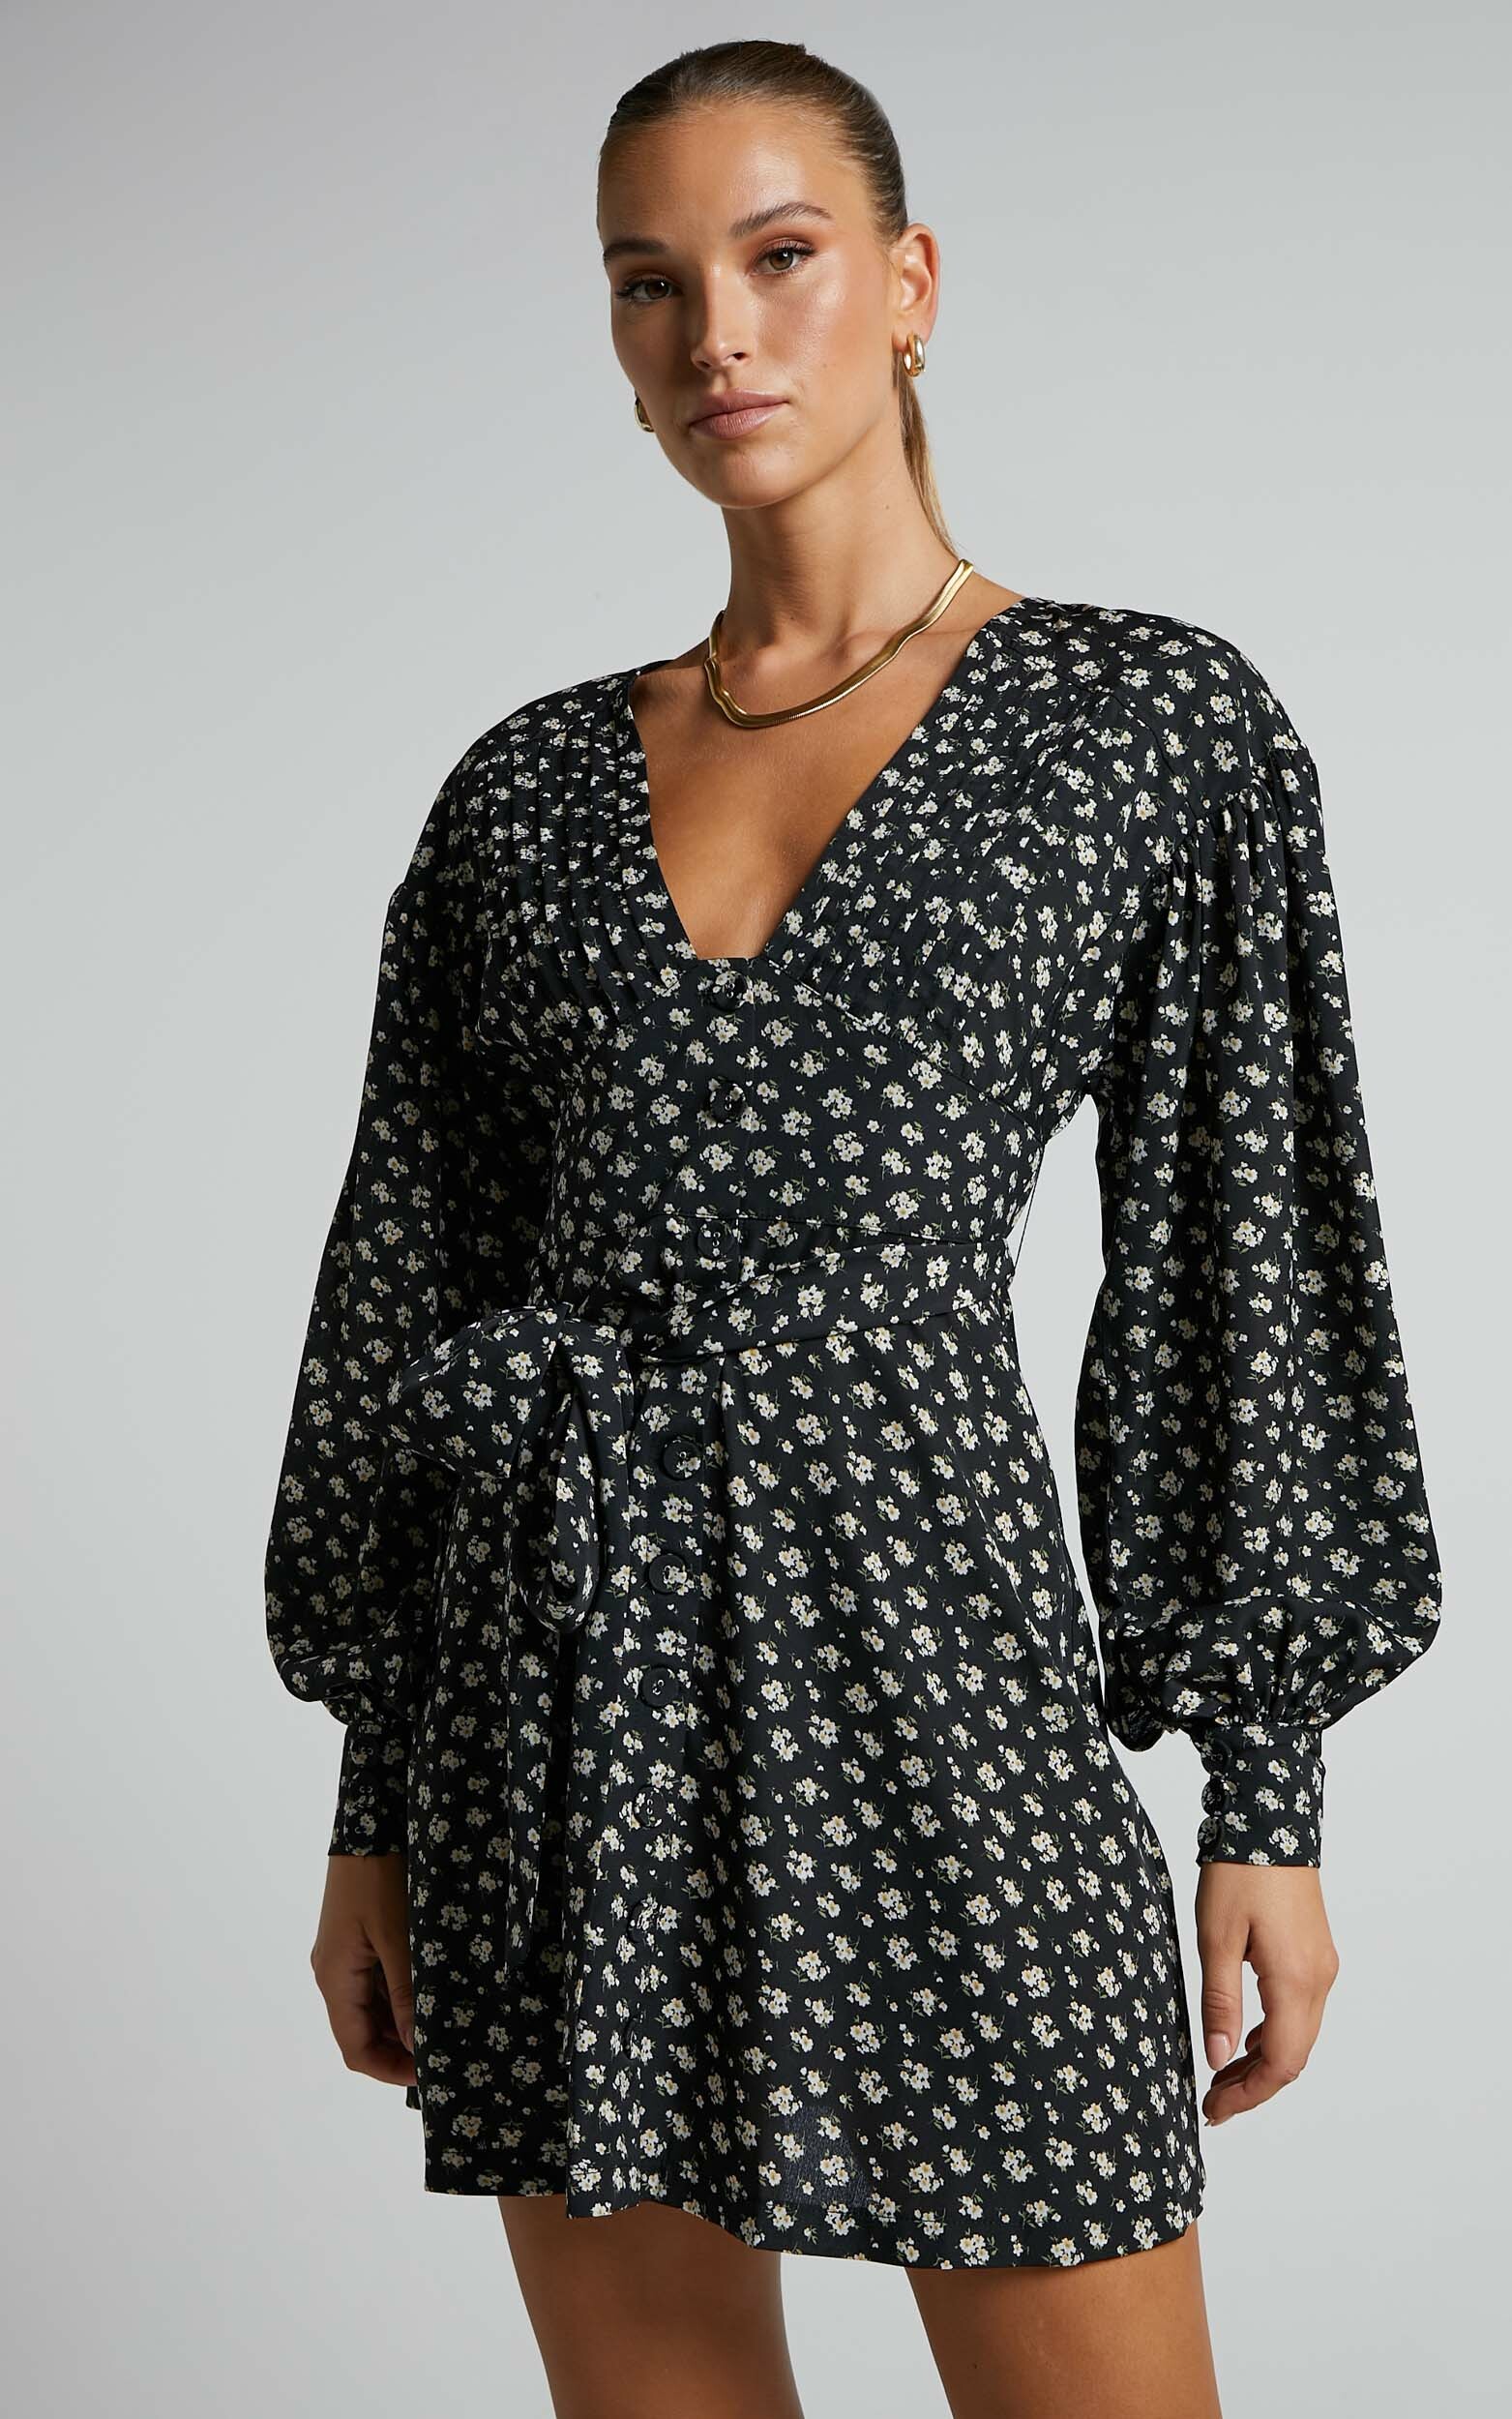 Kakai Long Sleeve Button Up Tie Front Mini Dress in Black Floral - 04, BLK1, hi-res image number null